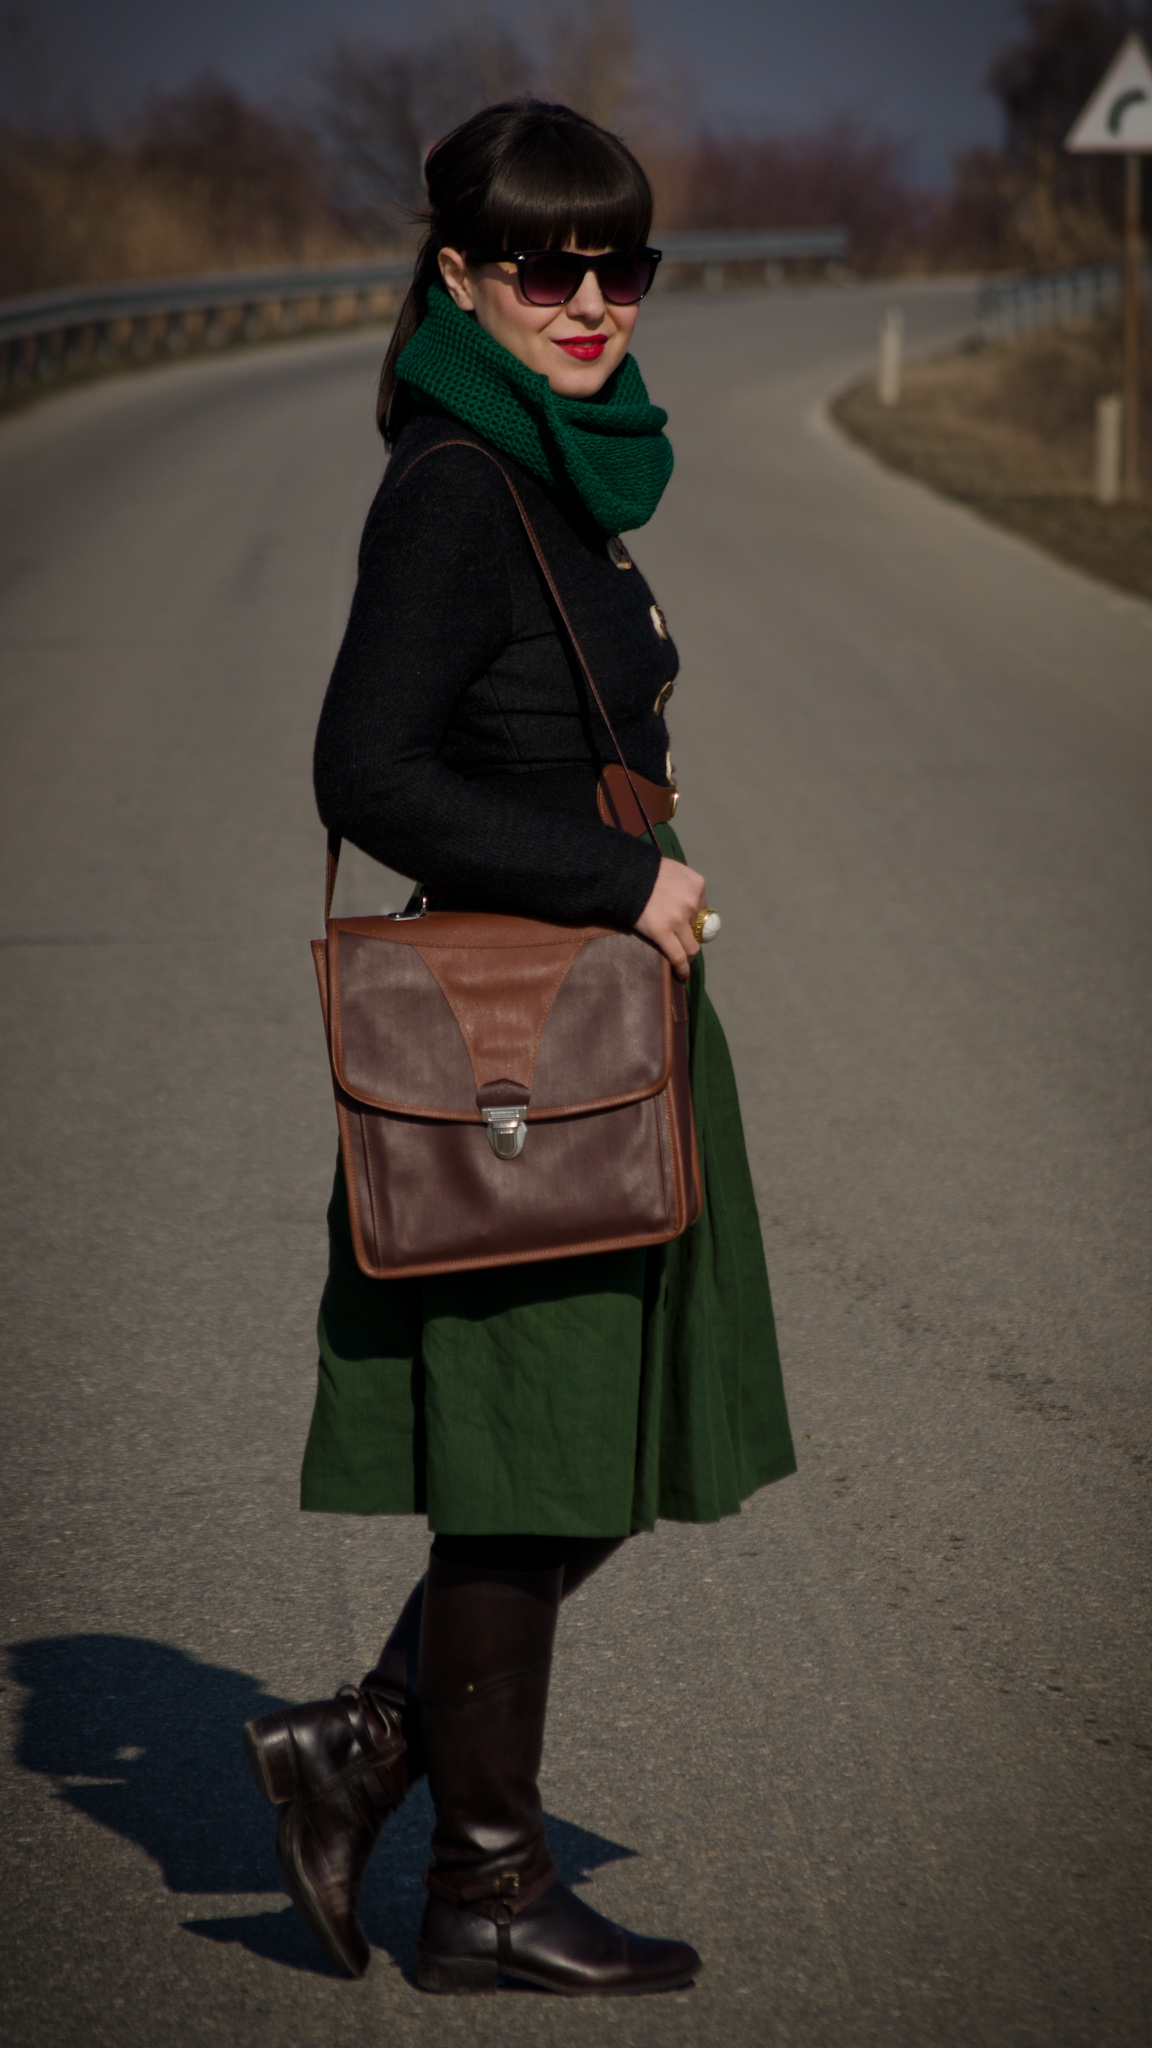 khaki midi dress thrifted brown boots green scarf army green outfit brown satchel bag